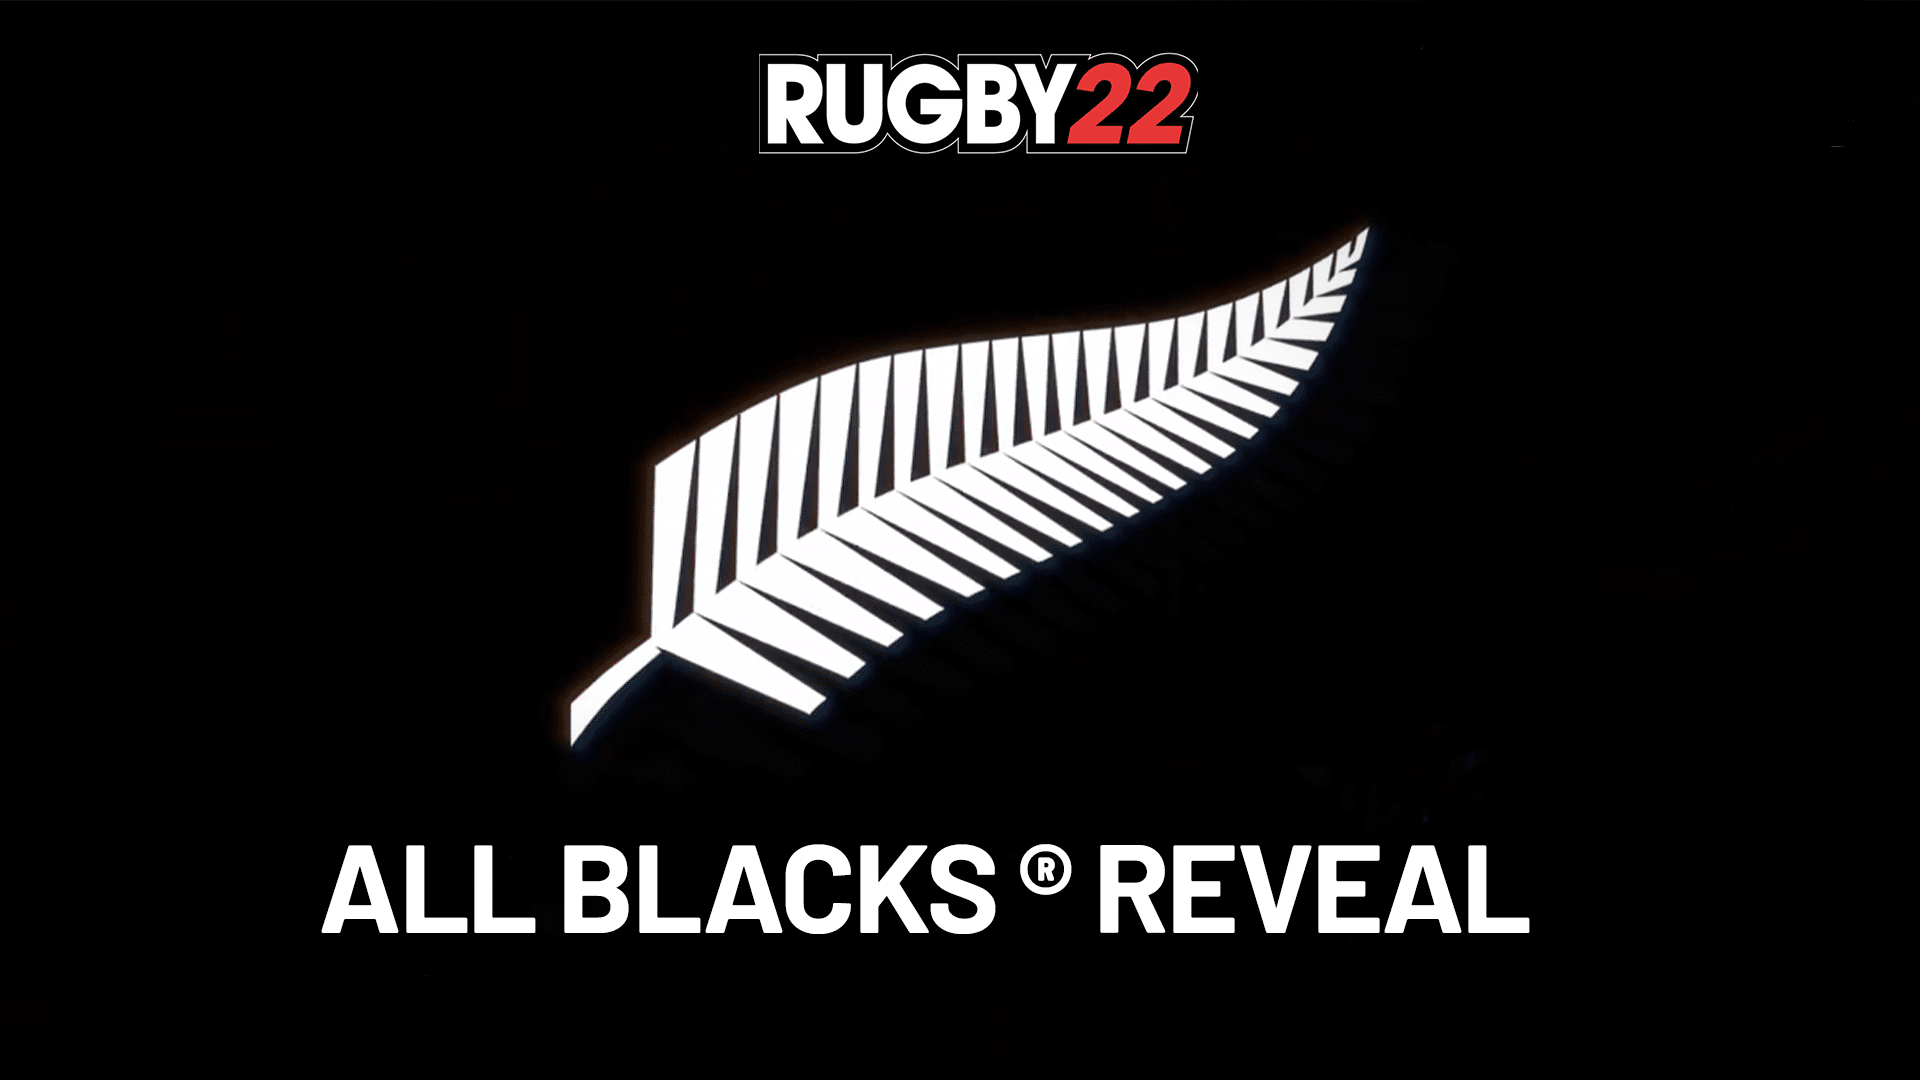 Let's discover the trailer of the official Rugby national teams 22 thumbnail